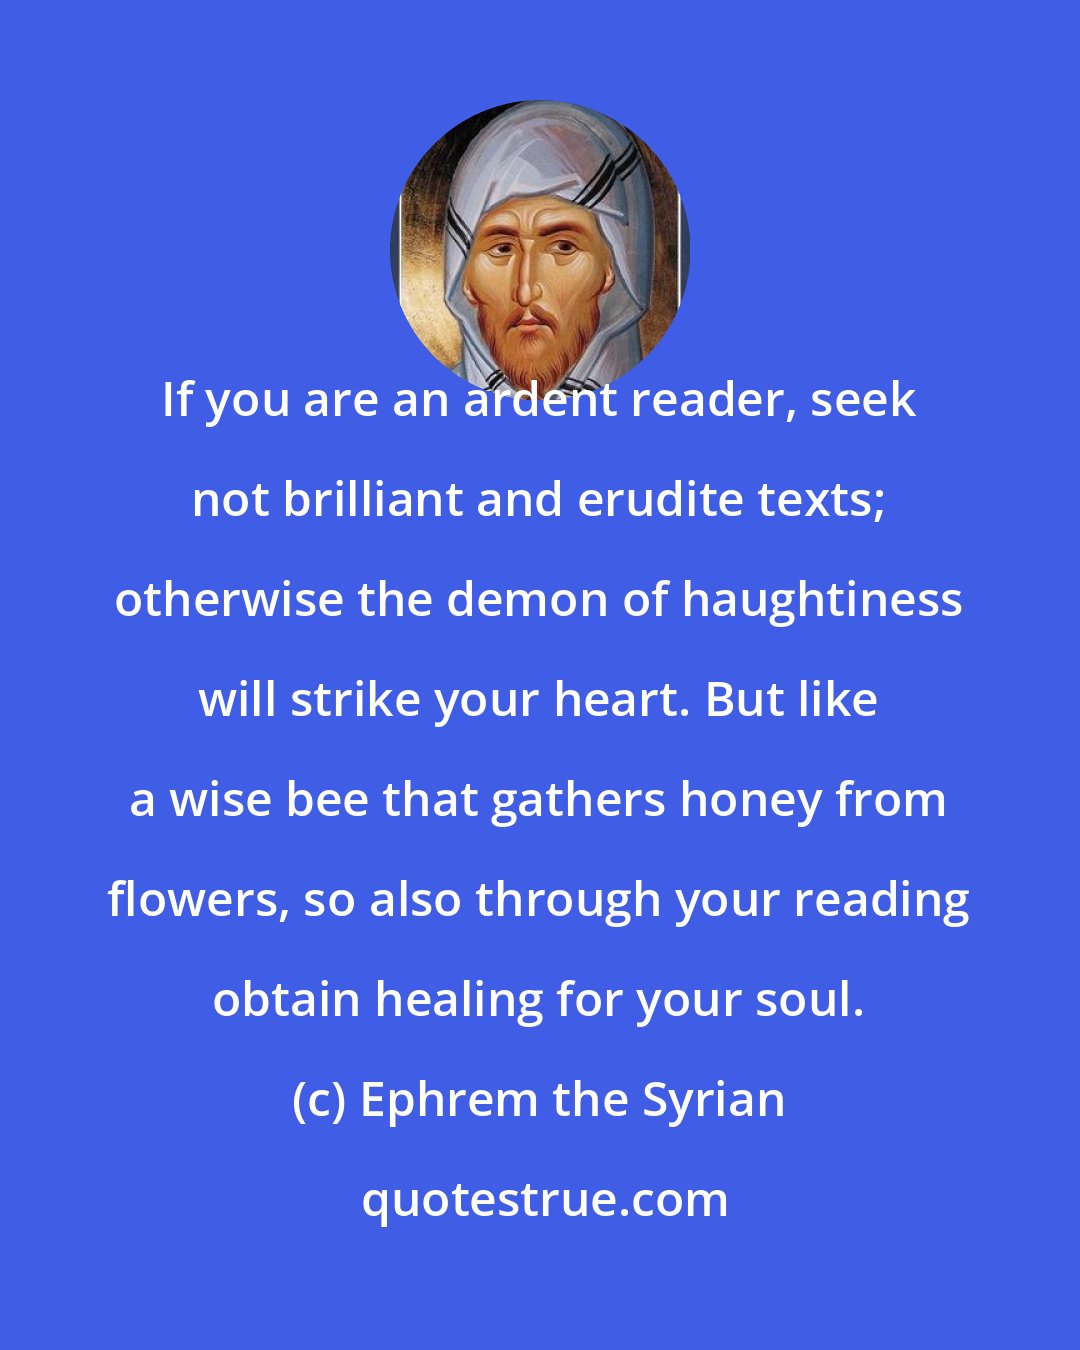 Ephrem the Syrian: If you are an ardent reader, seek not brilliant and erudite texts; otherwise the demon of haughtiness will strike your heart. But like a wise bee that gathers honey from flowers, so also through your reading obtain healing for your soul.